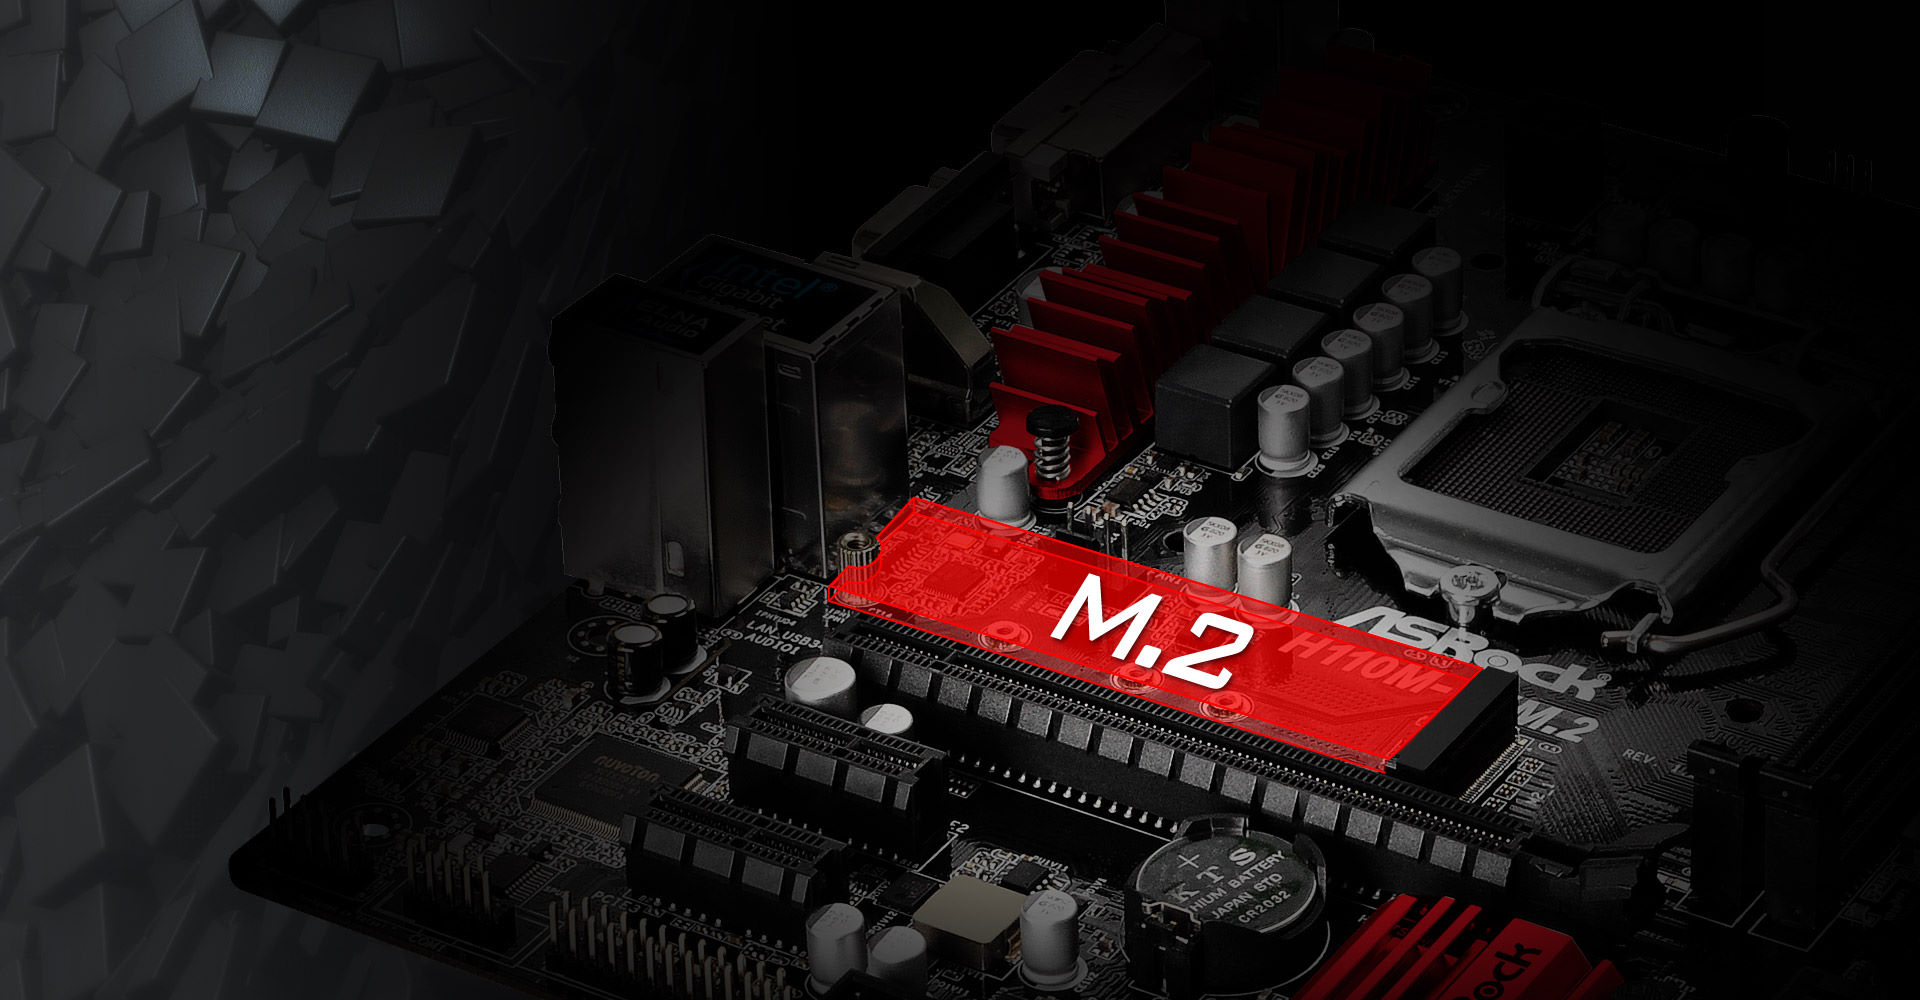 acpi x64-based pc motherboard ssd specs